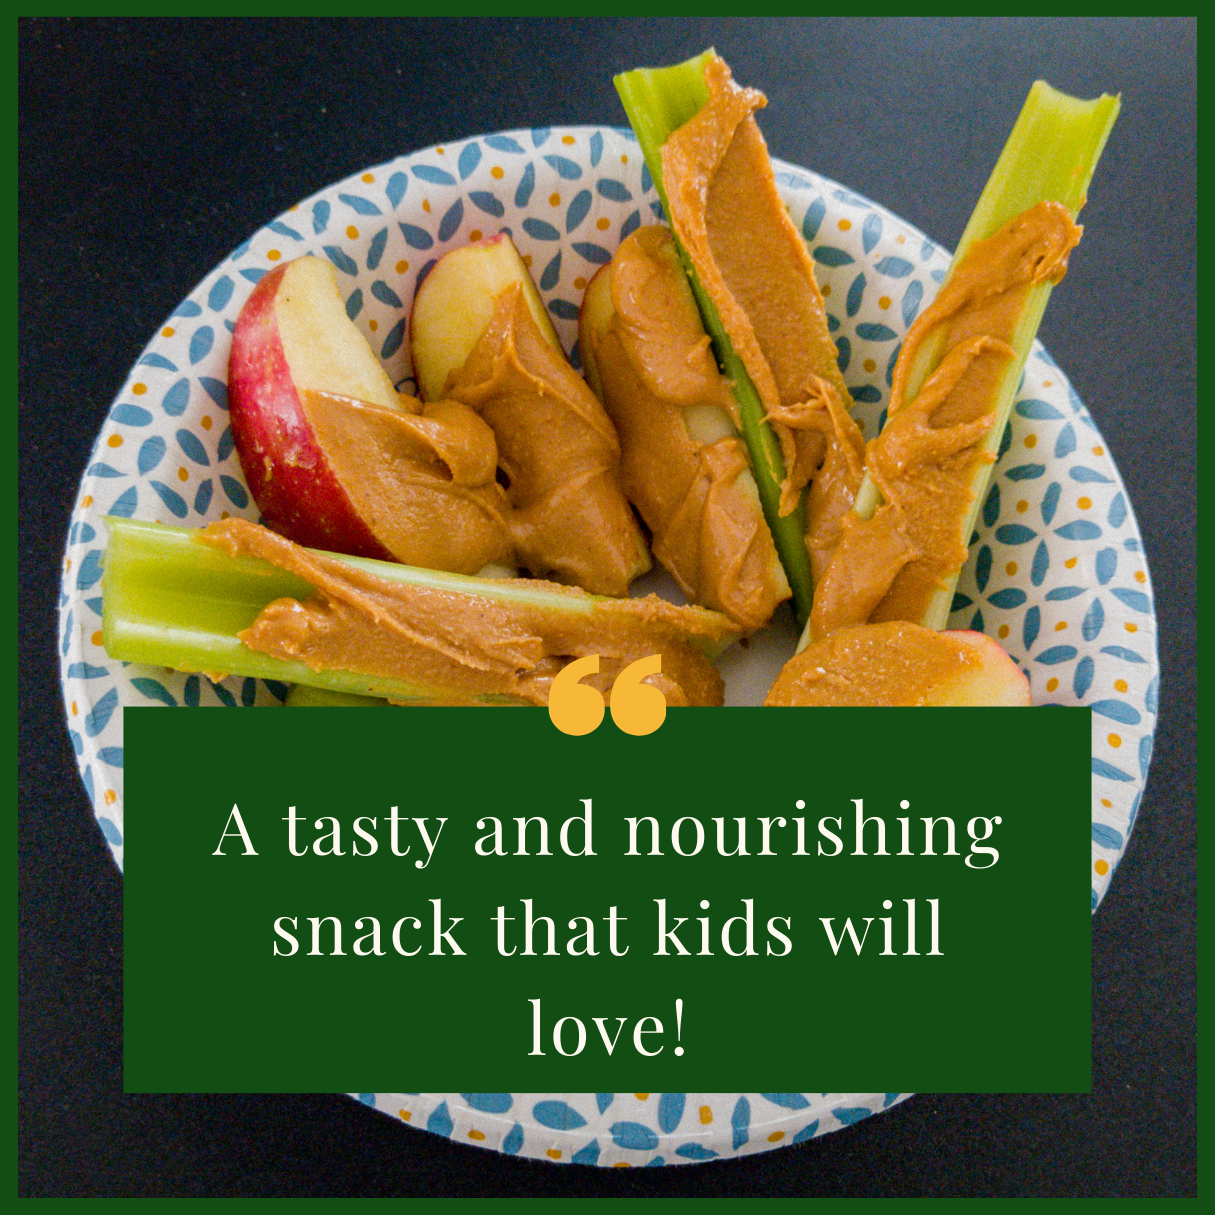 Sliced Apple with Peanut Butter: A Kid-Friendly and Nutritious Treat